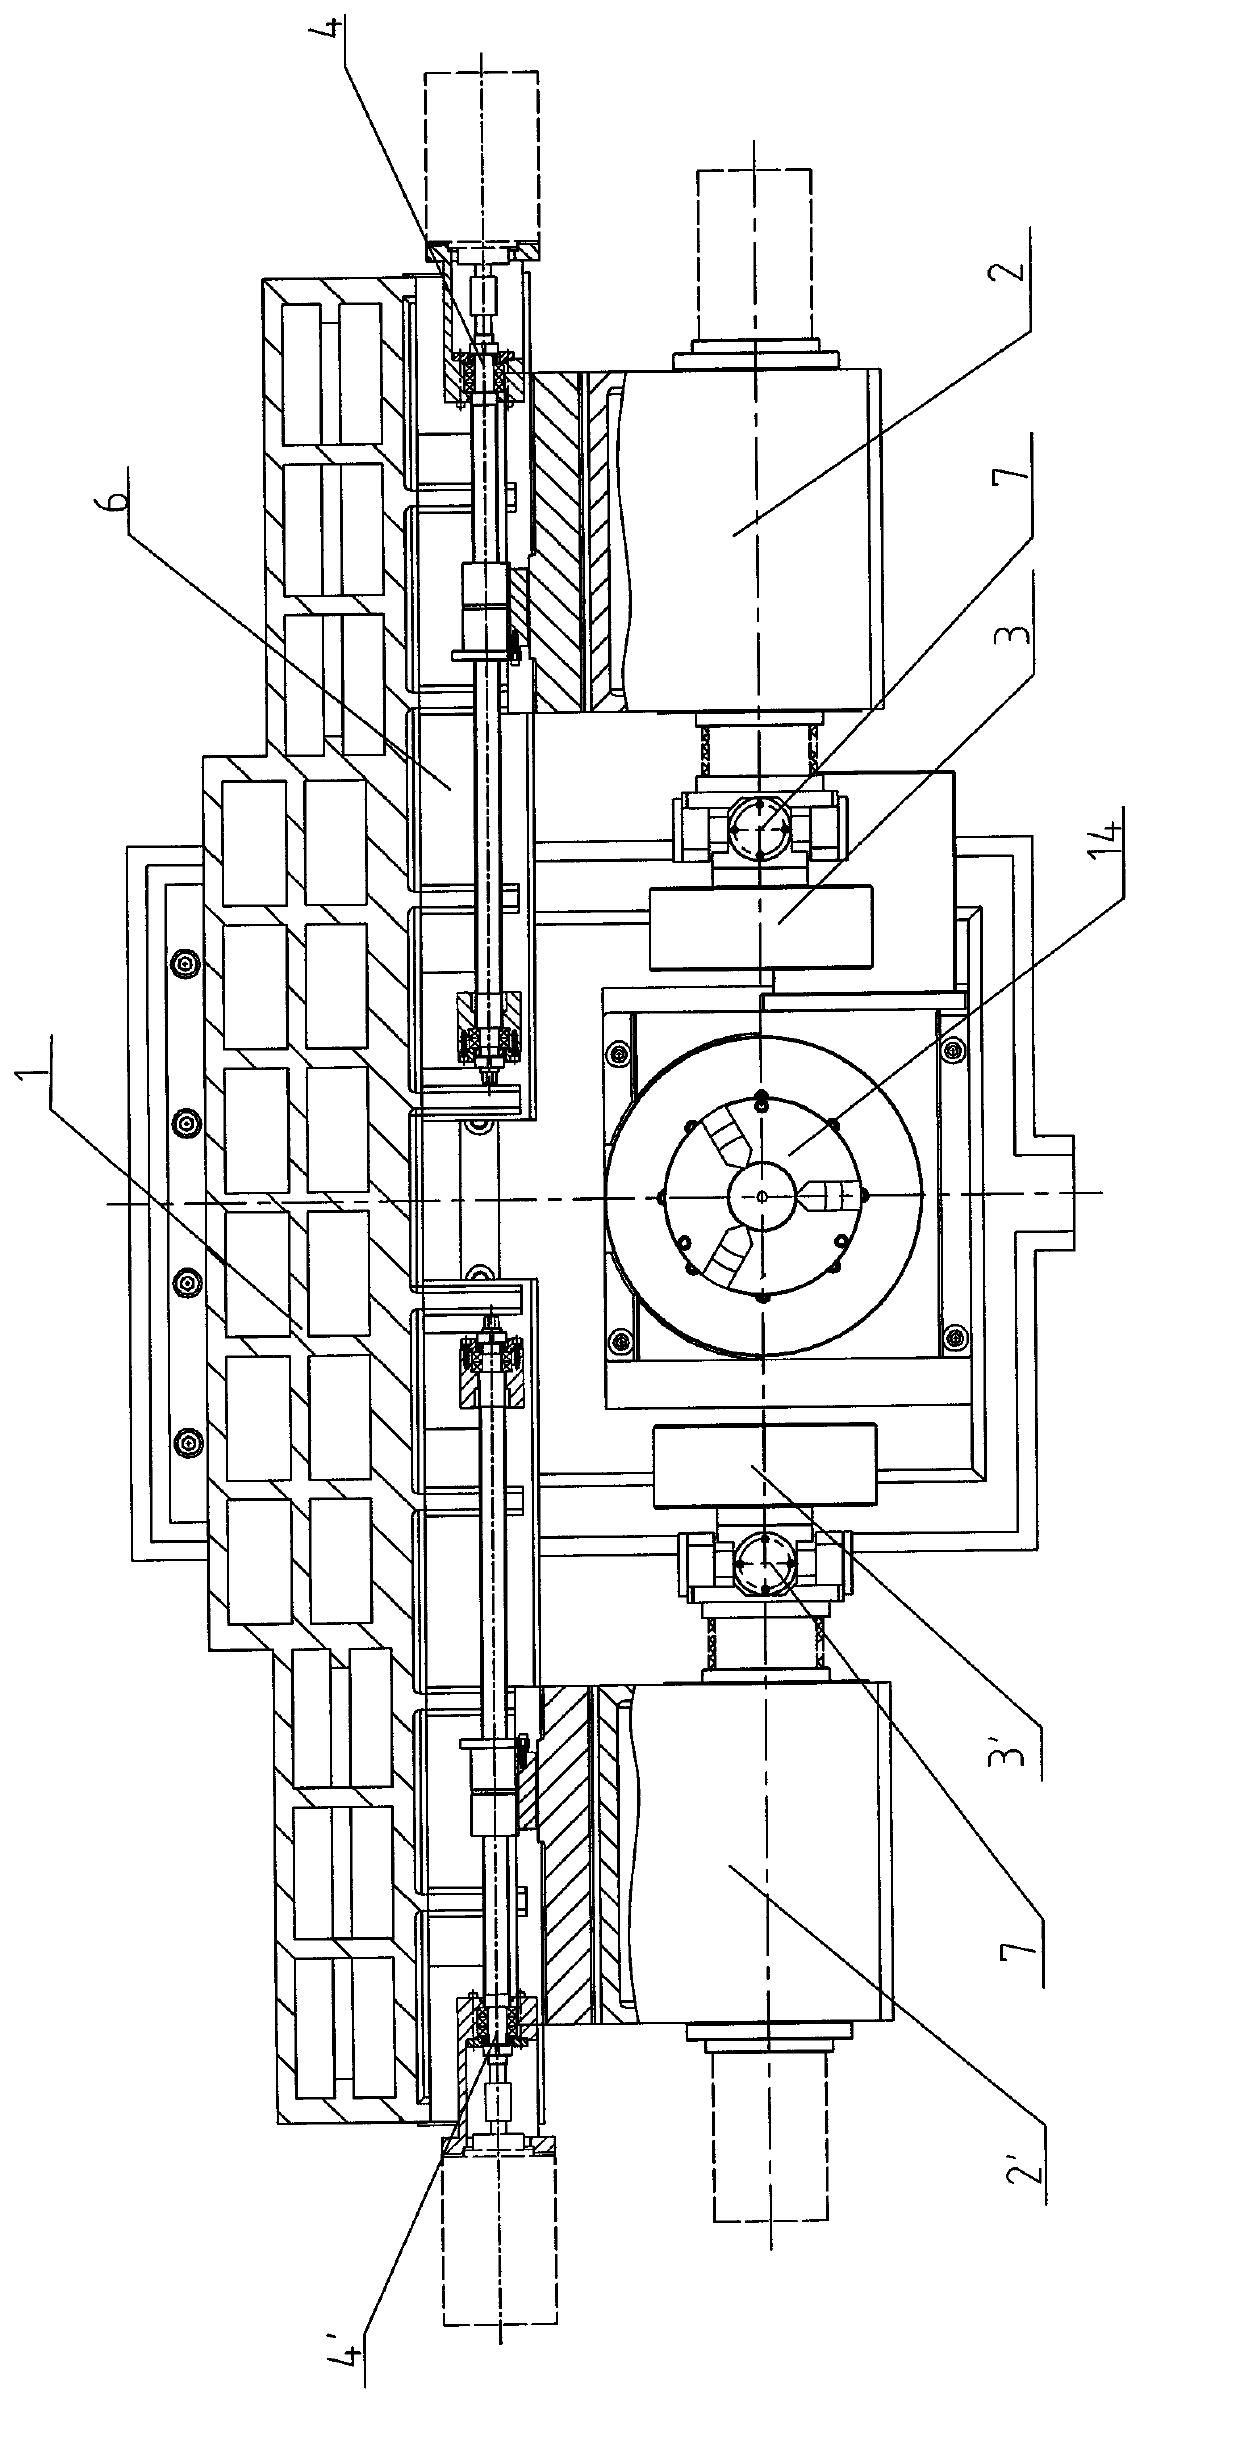 Machine tool for running-in process of ball and valve seat of ball valve